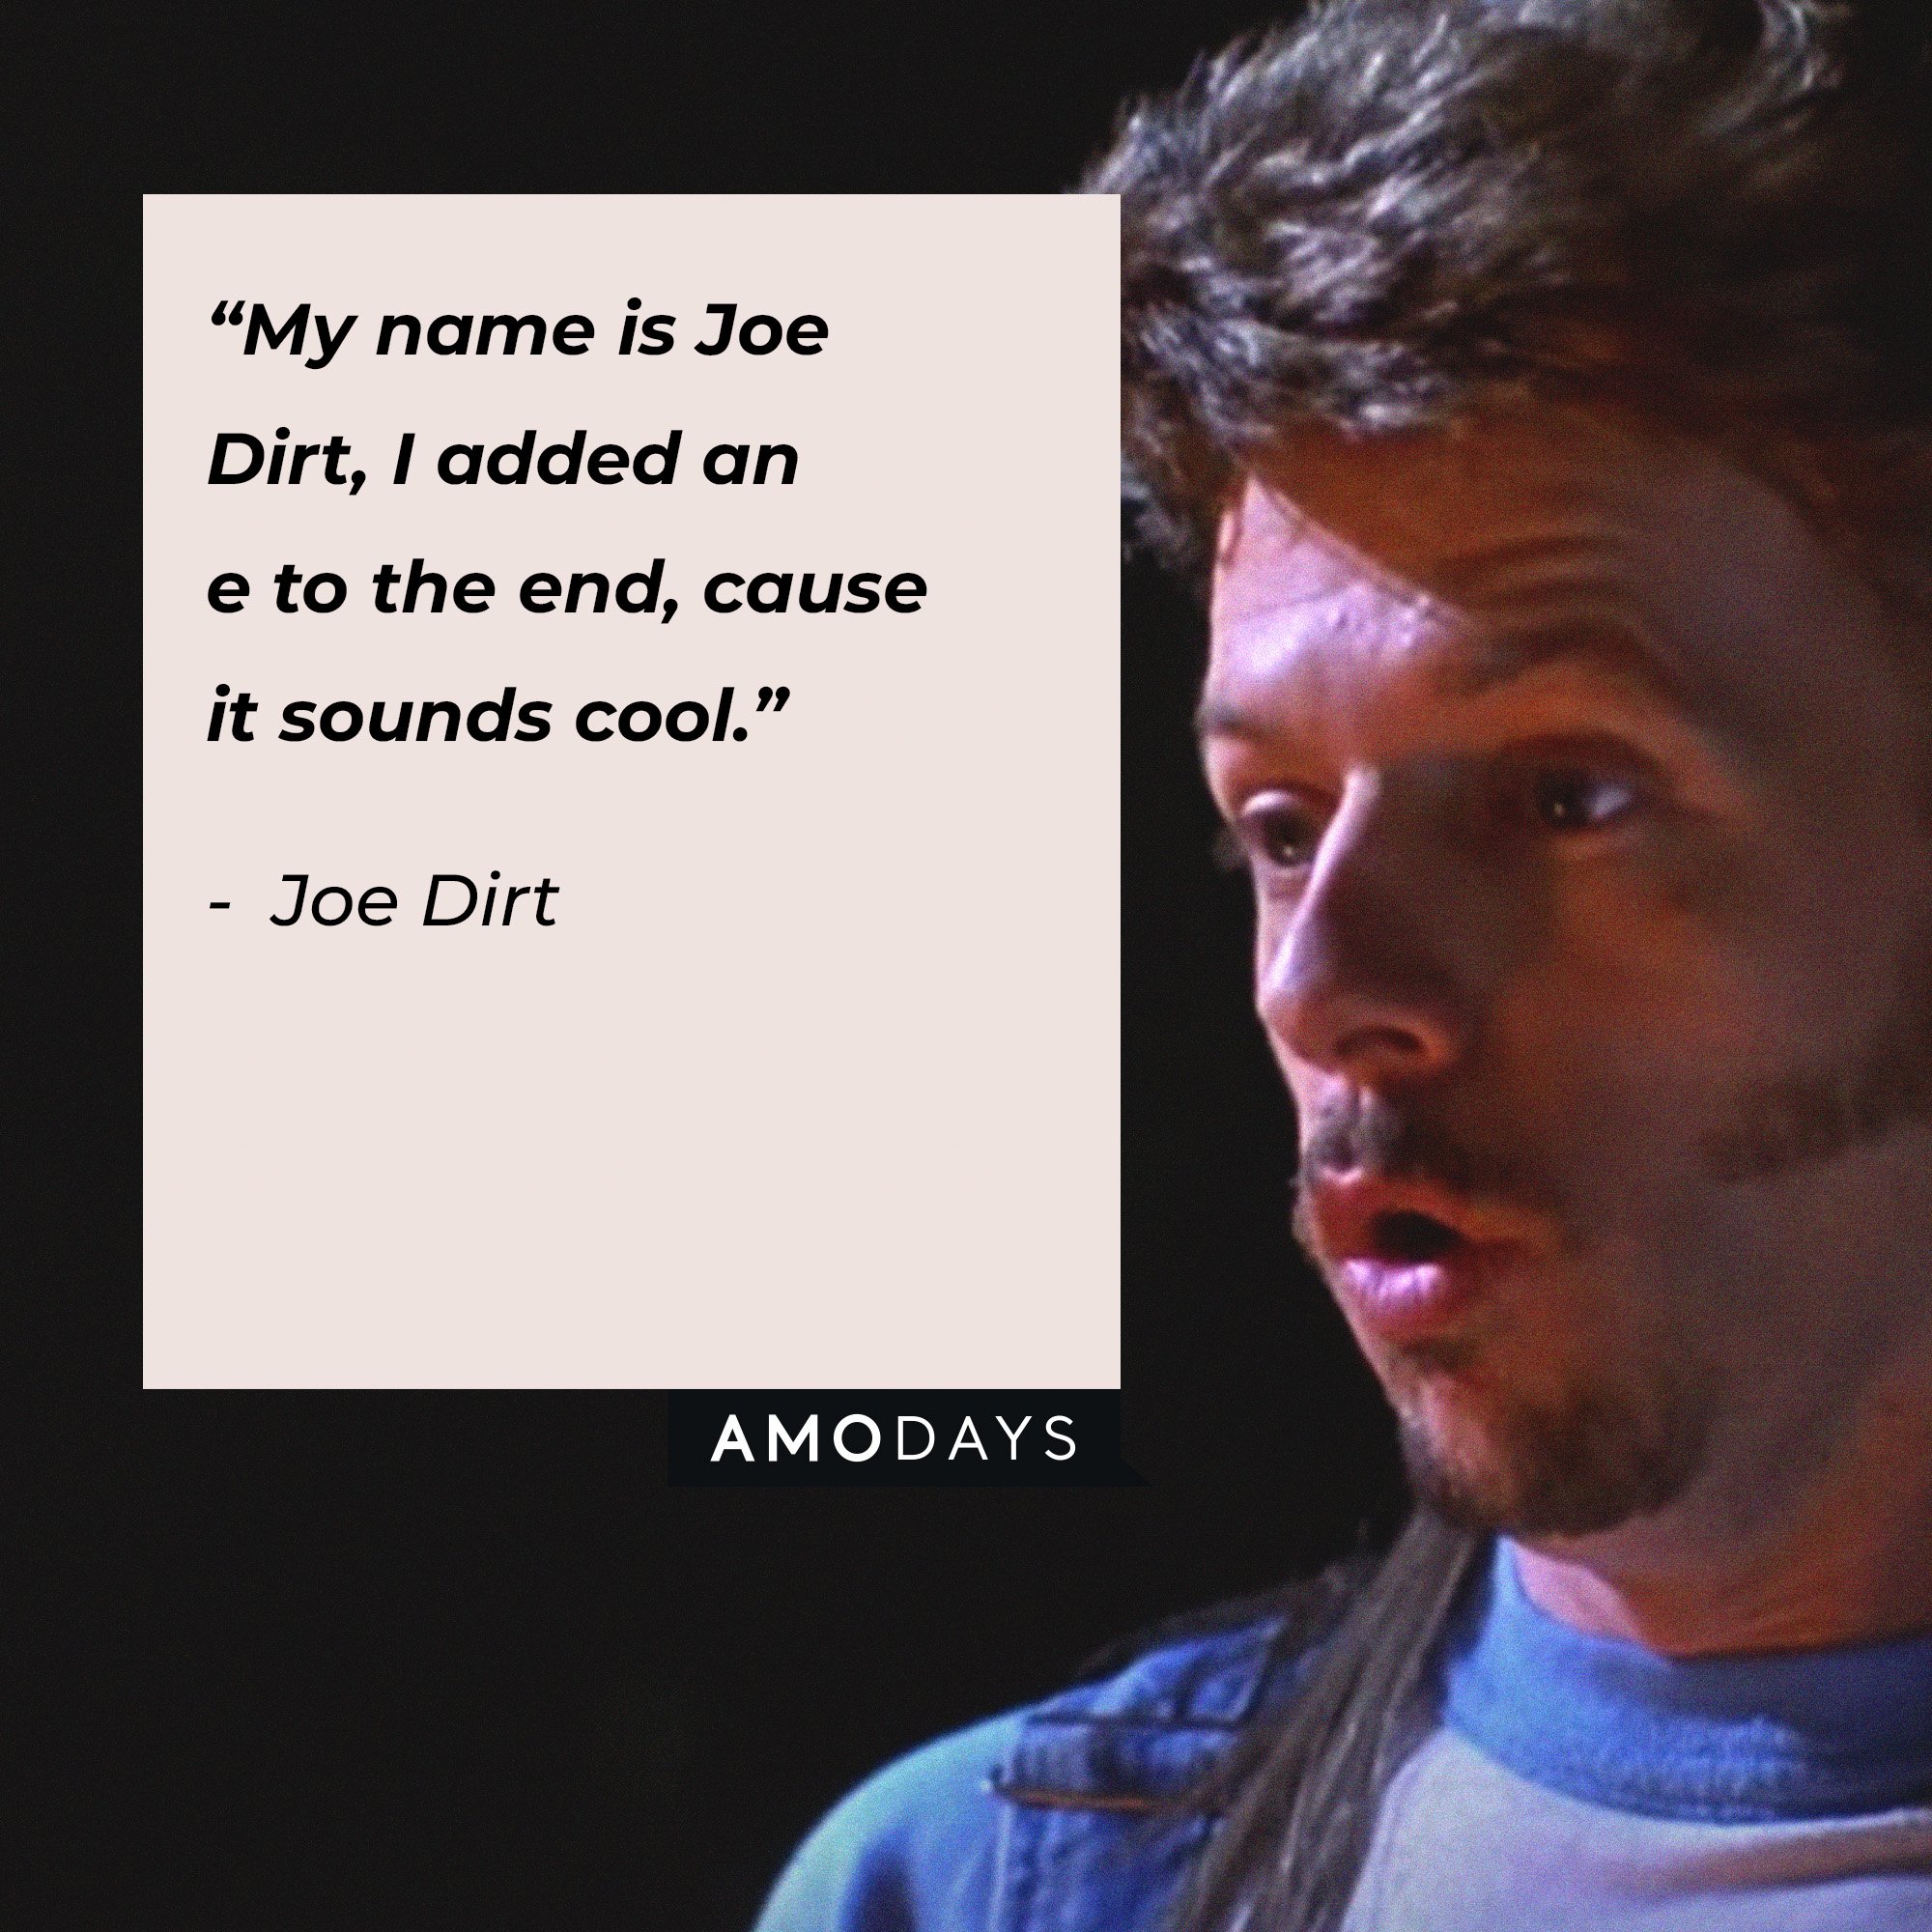 Joe Dirt's quote: “My name is Joe Dirt, I added an e to the end, cause it sounds cool.” | Image: AmoDays